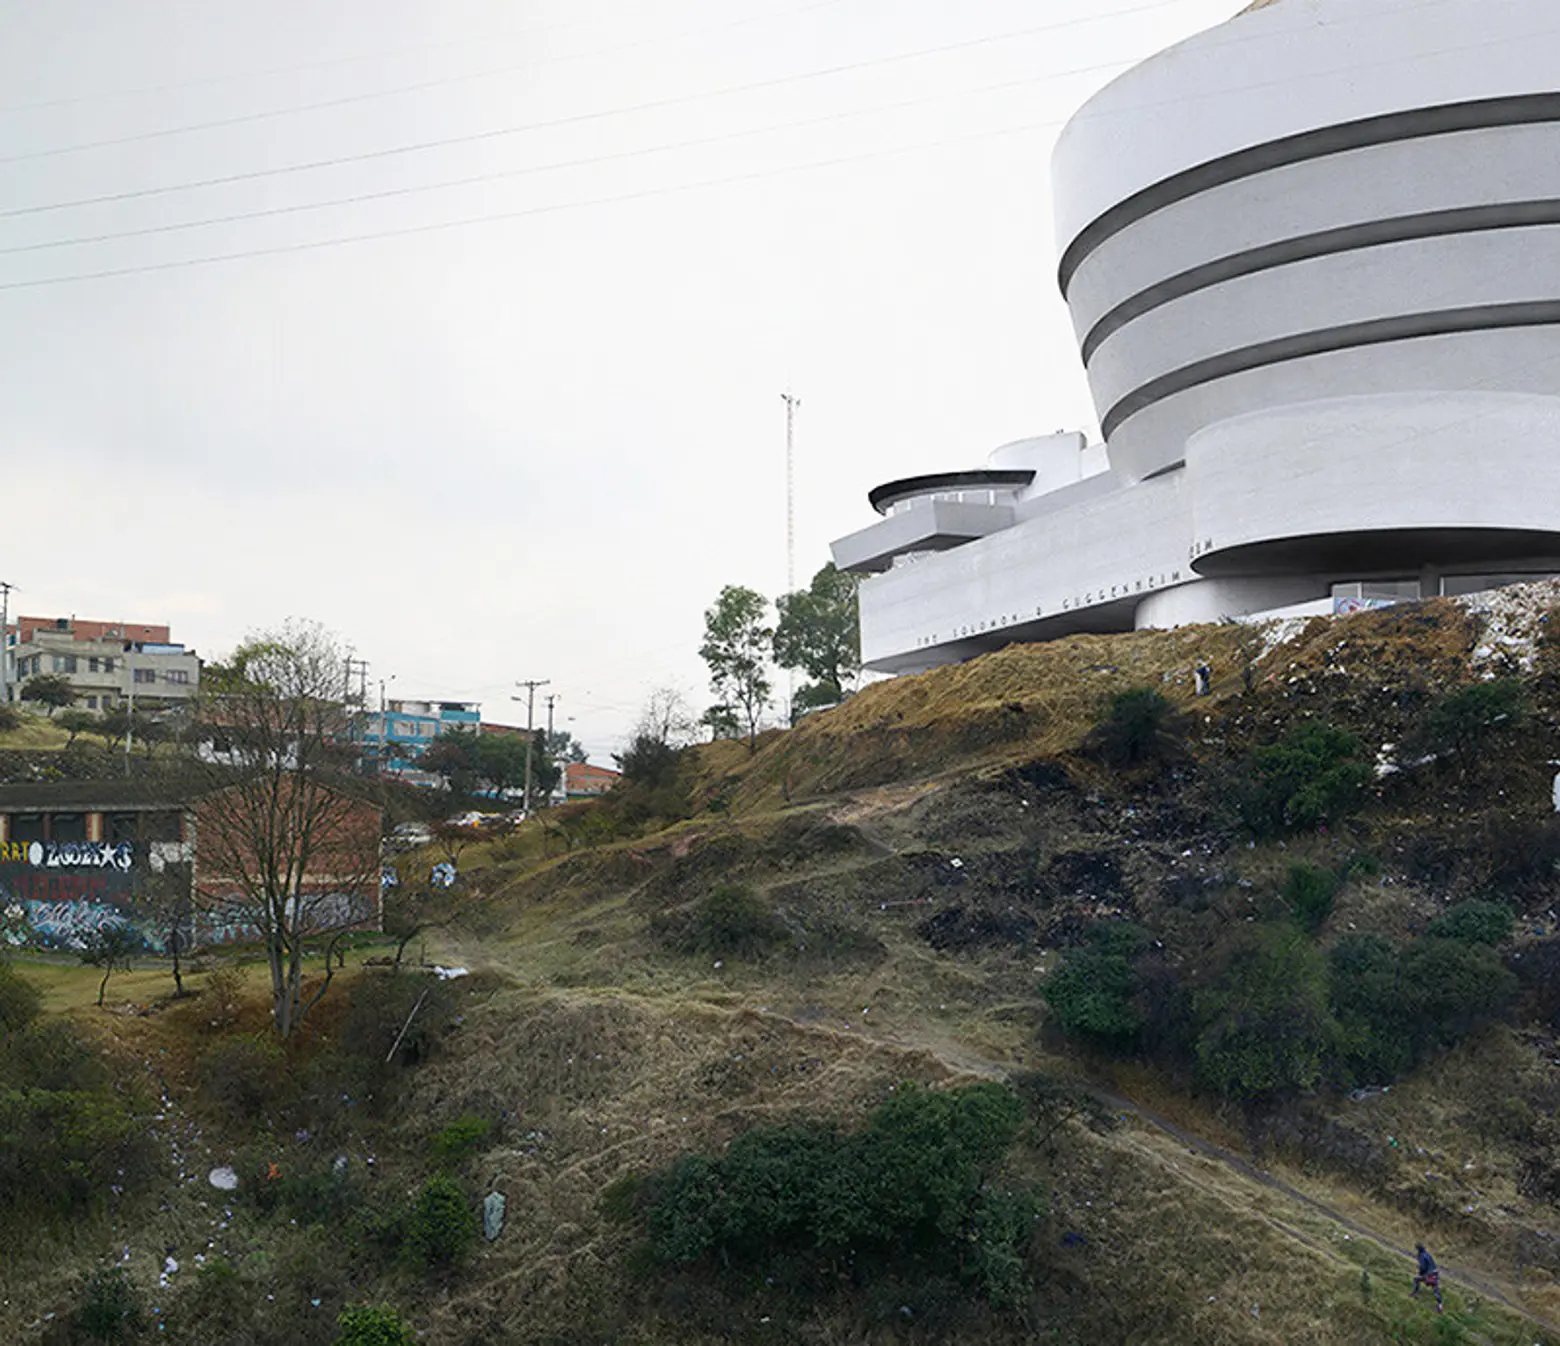 The Guggenheim Superimposed On a Struggling Colombian City Highlights Urban Identity